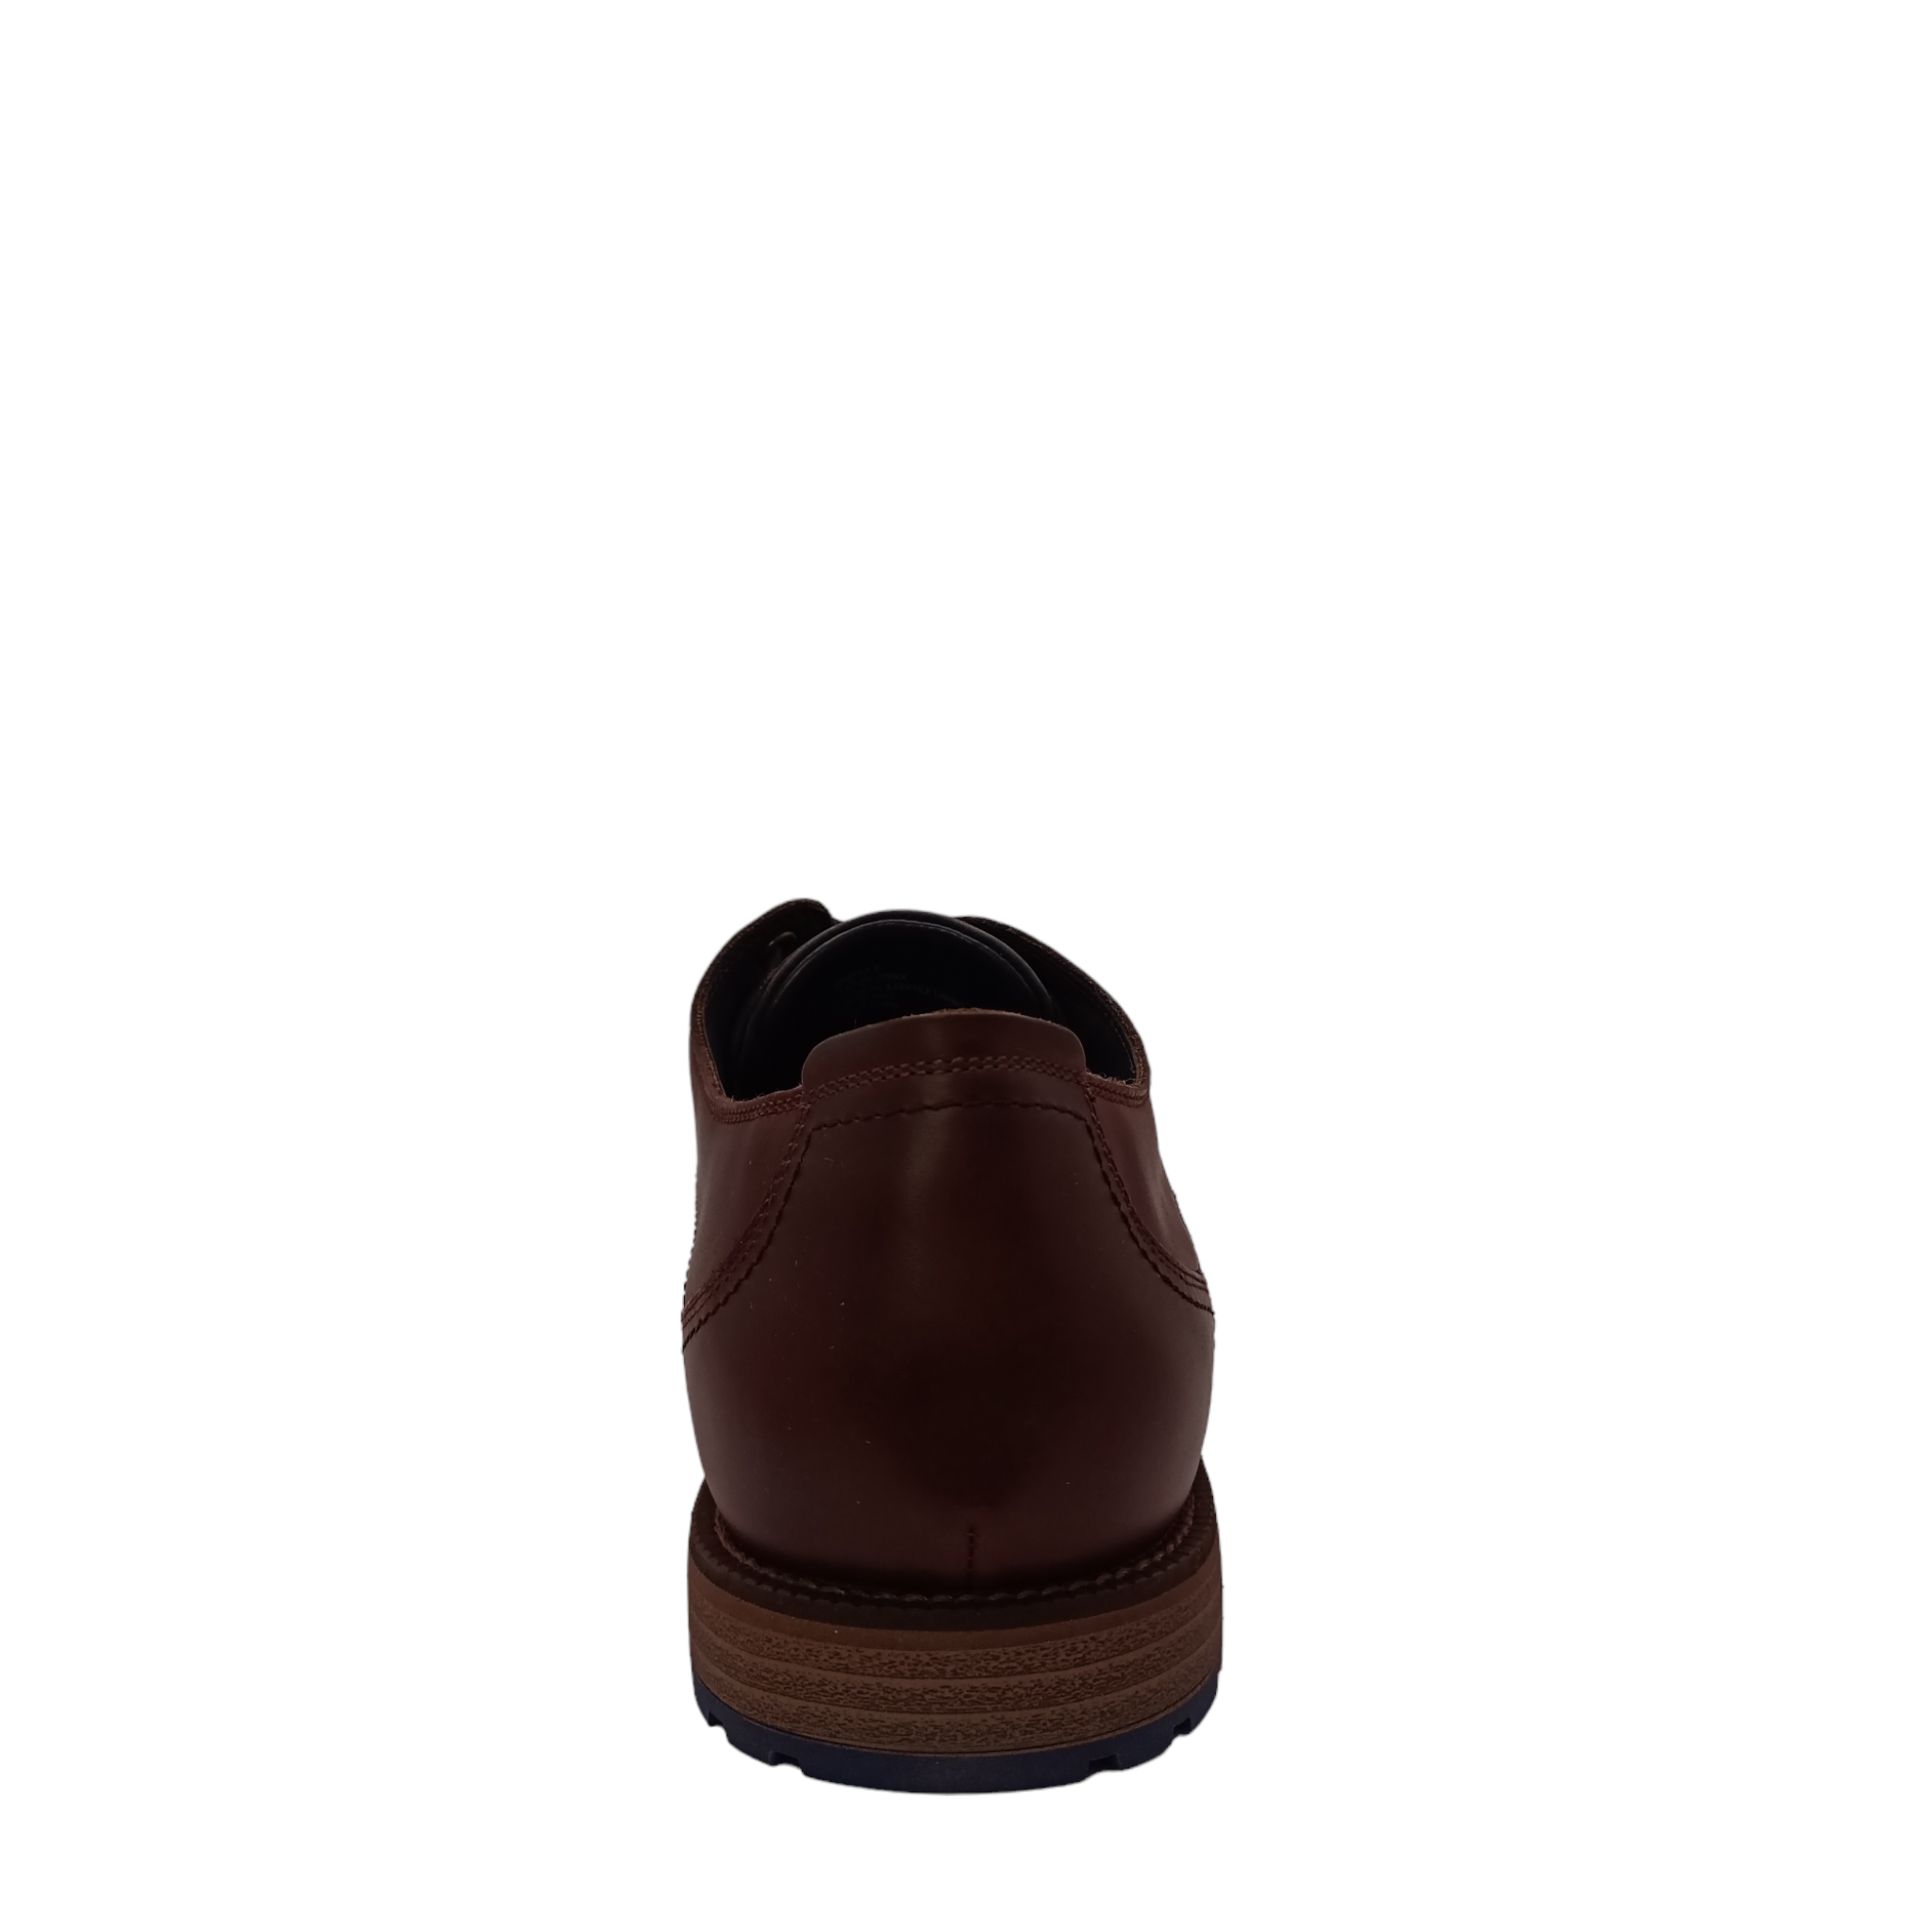 Shop Render Julius Marlow - with shoe&me - from Julius Marlow - Shoes - Mens, Shoe, Winter